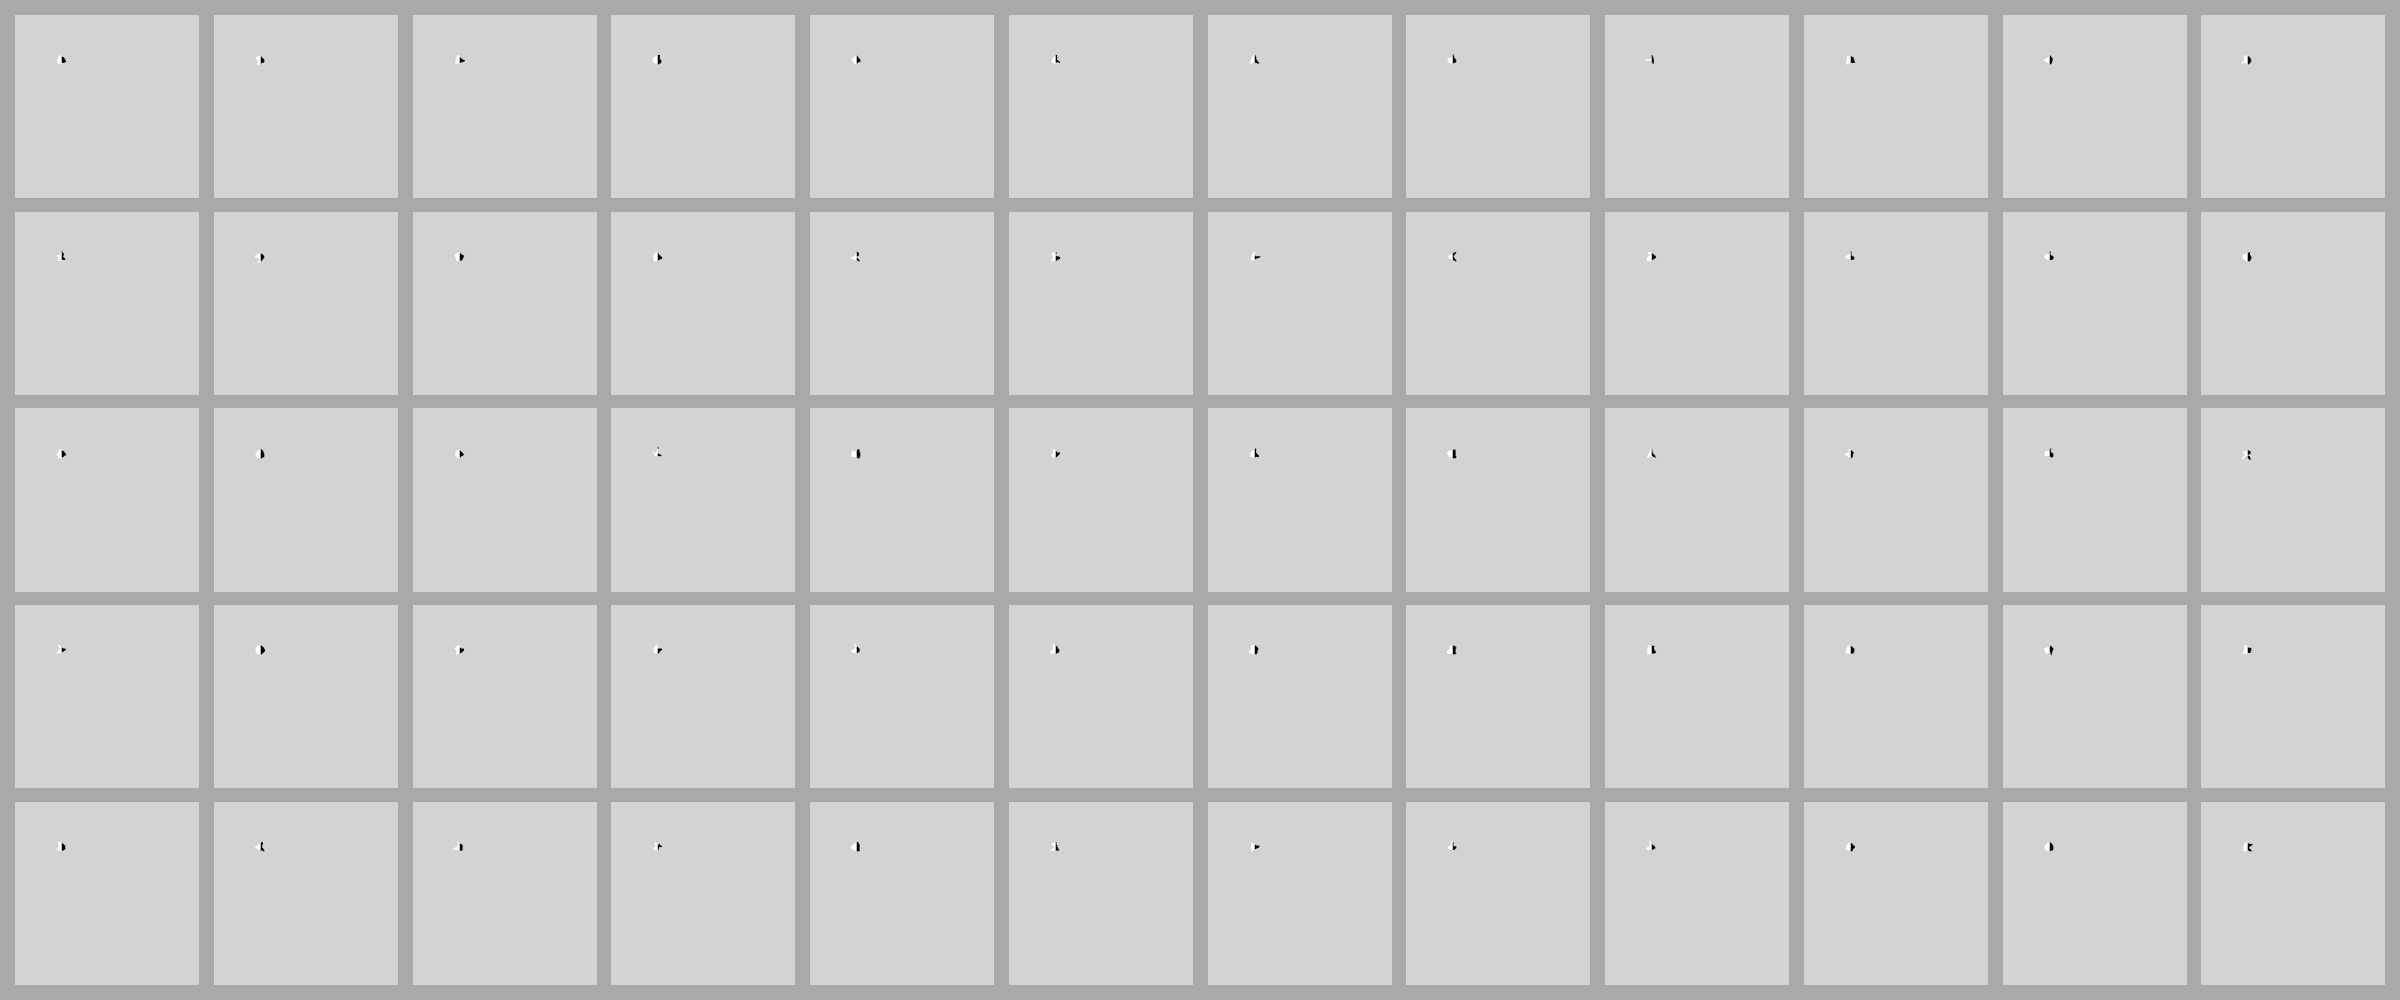 A grid of 2D shapes undergoing rotation, translation, and scaling.